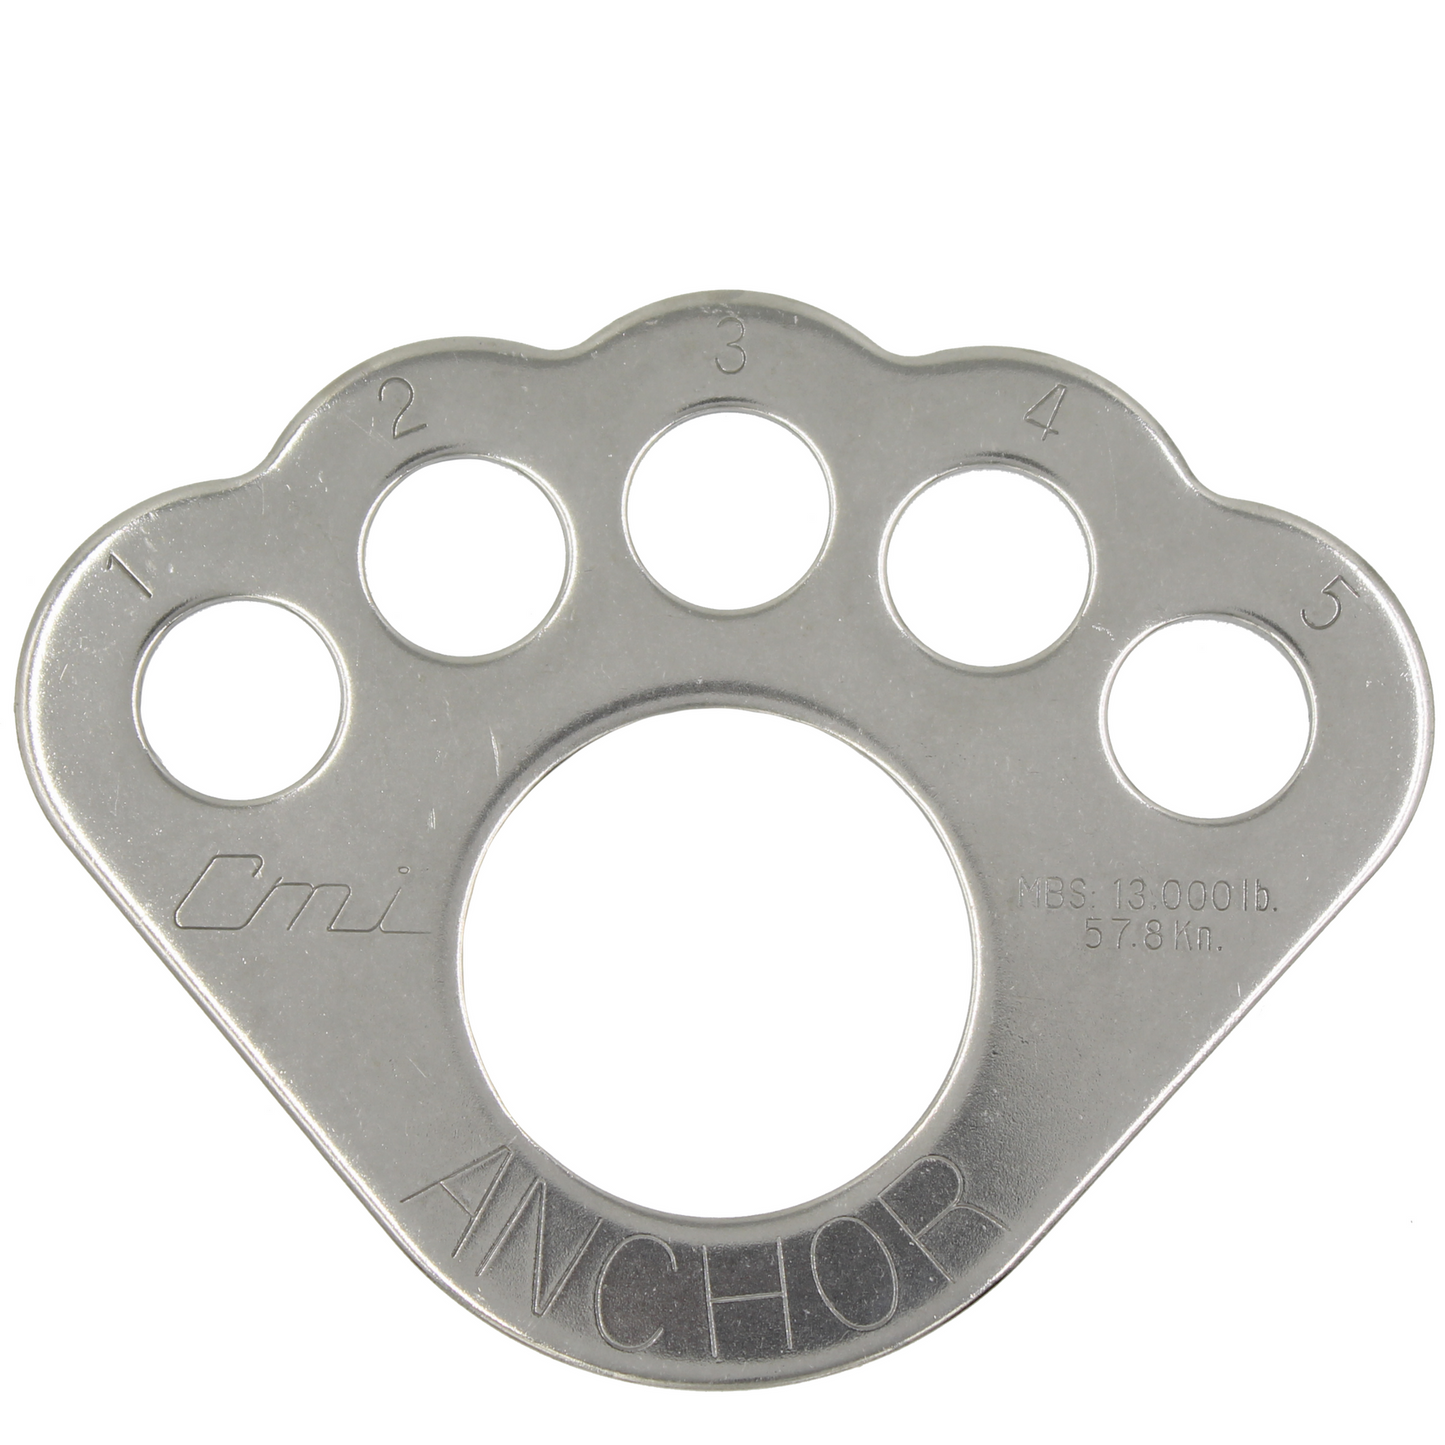 CMI NFPA Compliant Stainless Steel Bearpaw Rigplate (RIGPLATE2NFPA)